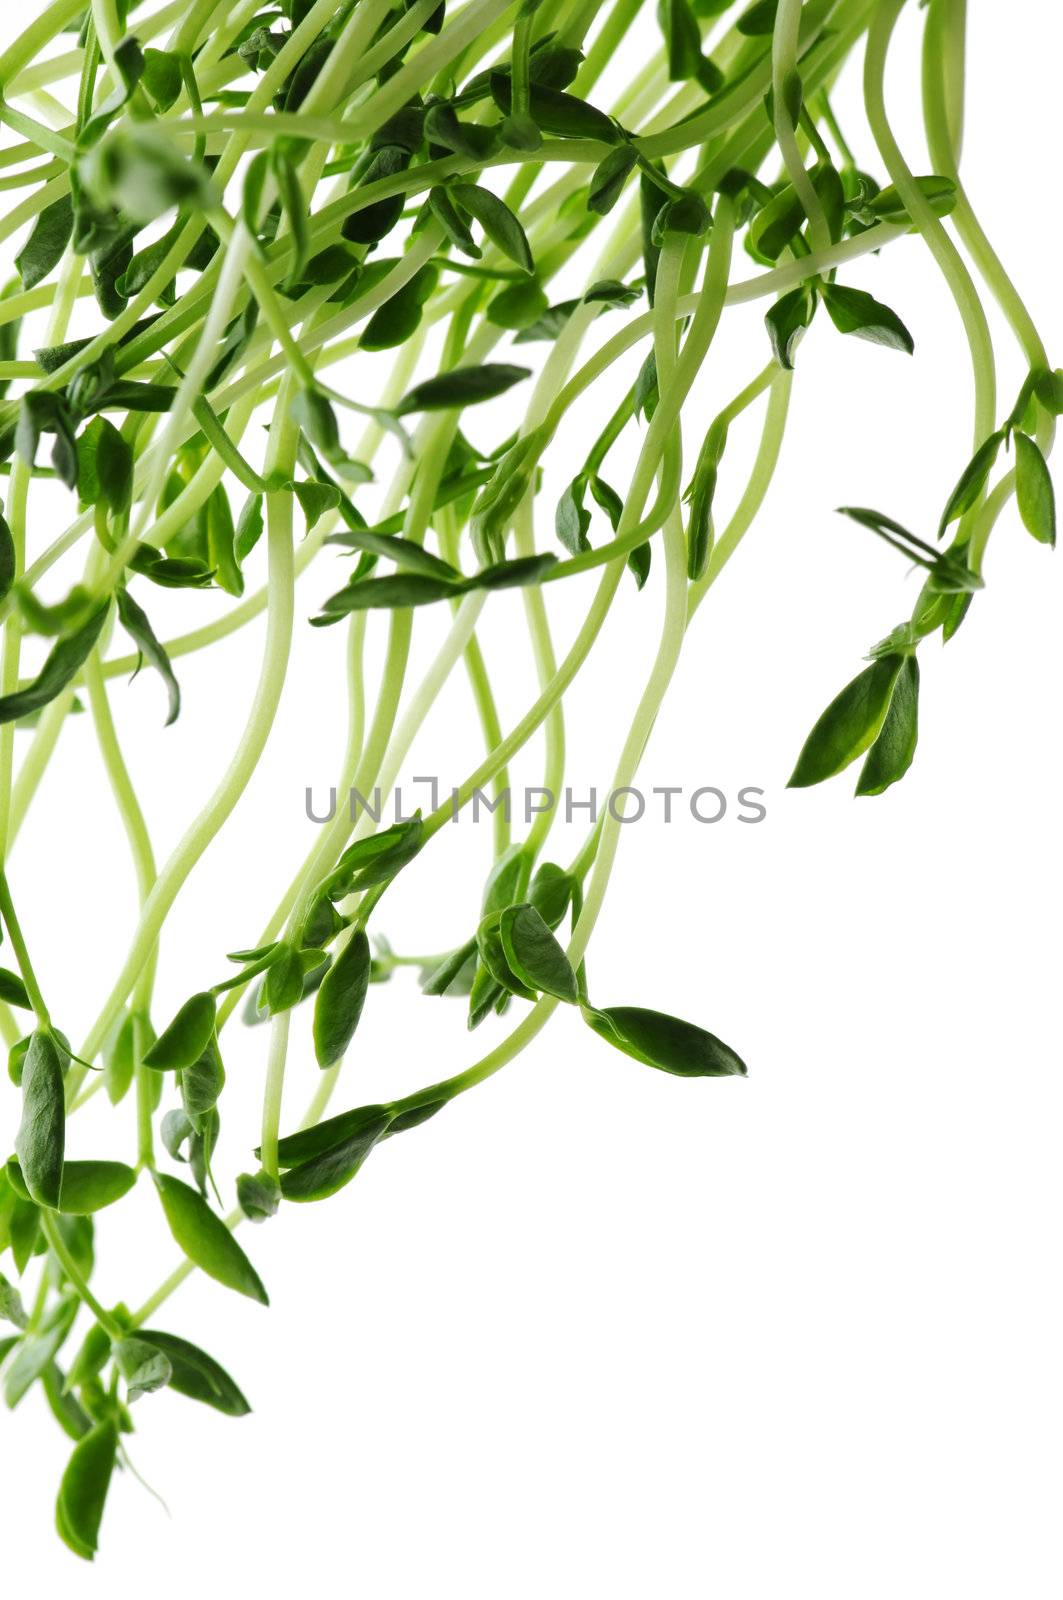 Green young pea sprouts isolated on white background